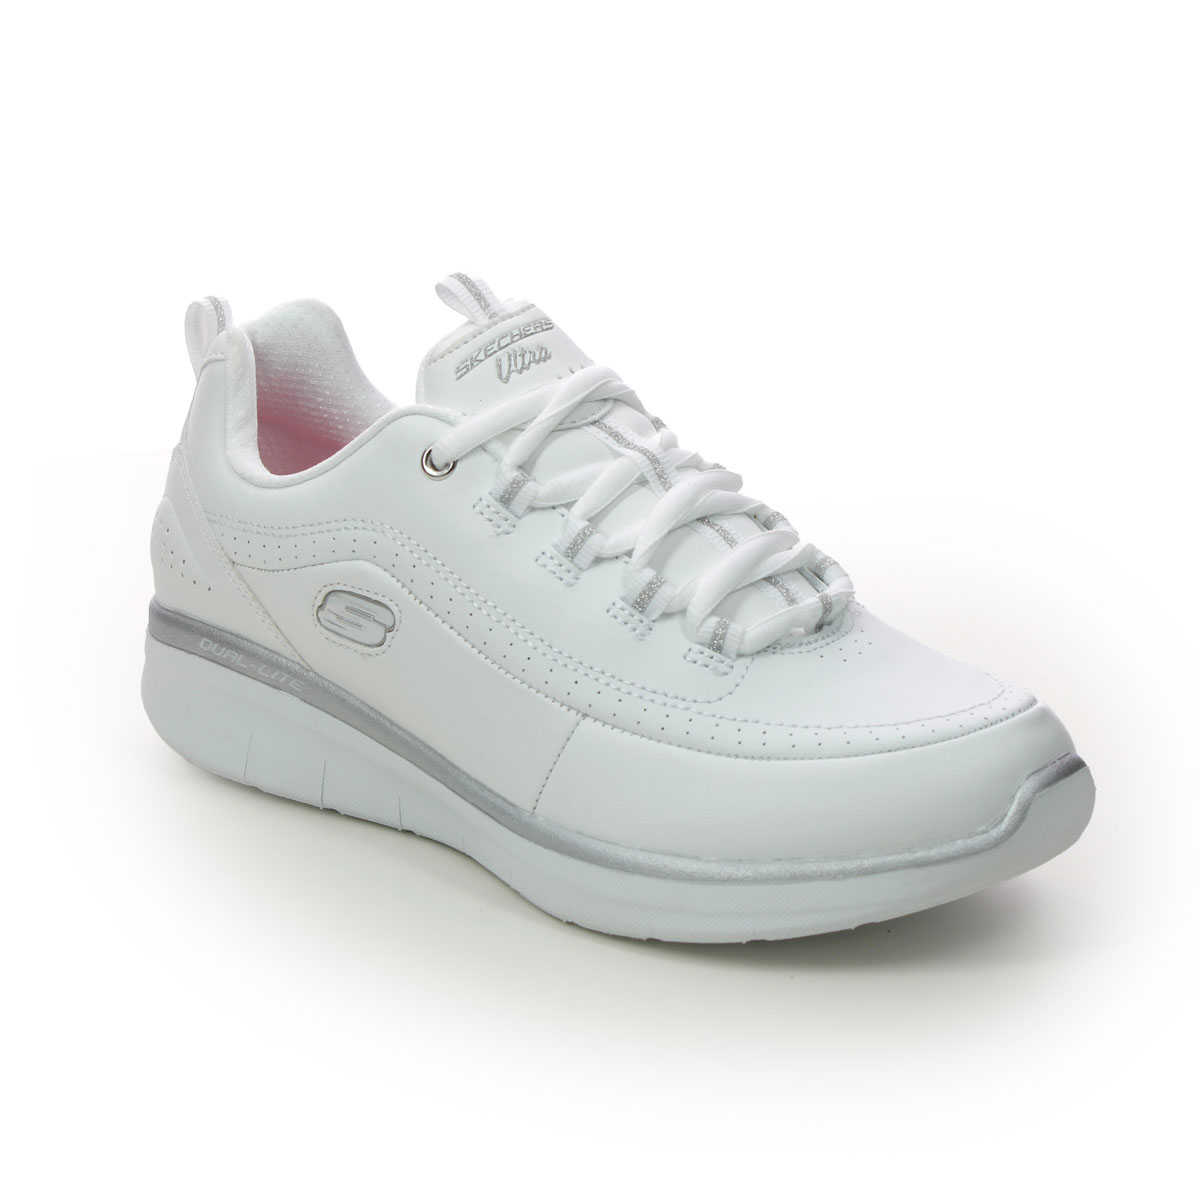 Skechers Synergy 2.0 WSL White Silver Womens trainers 12363 in a Plain Leather in Size 4.5